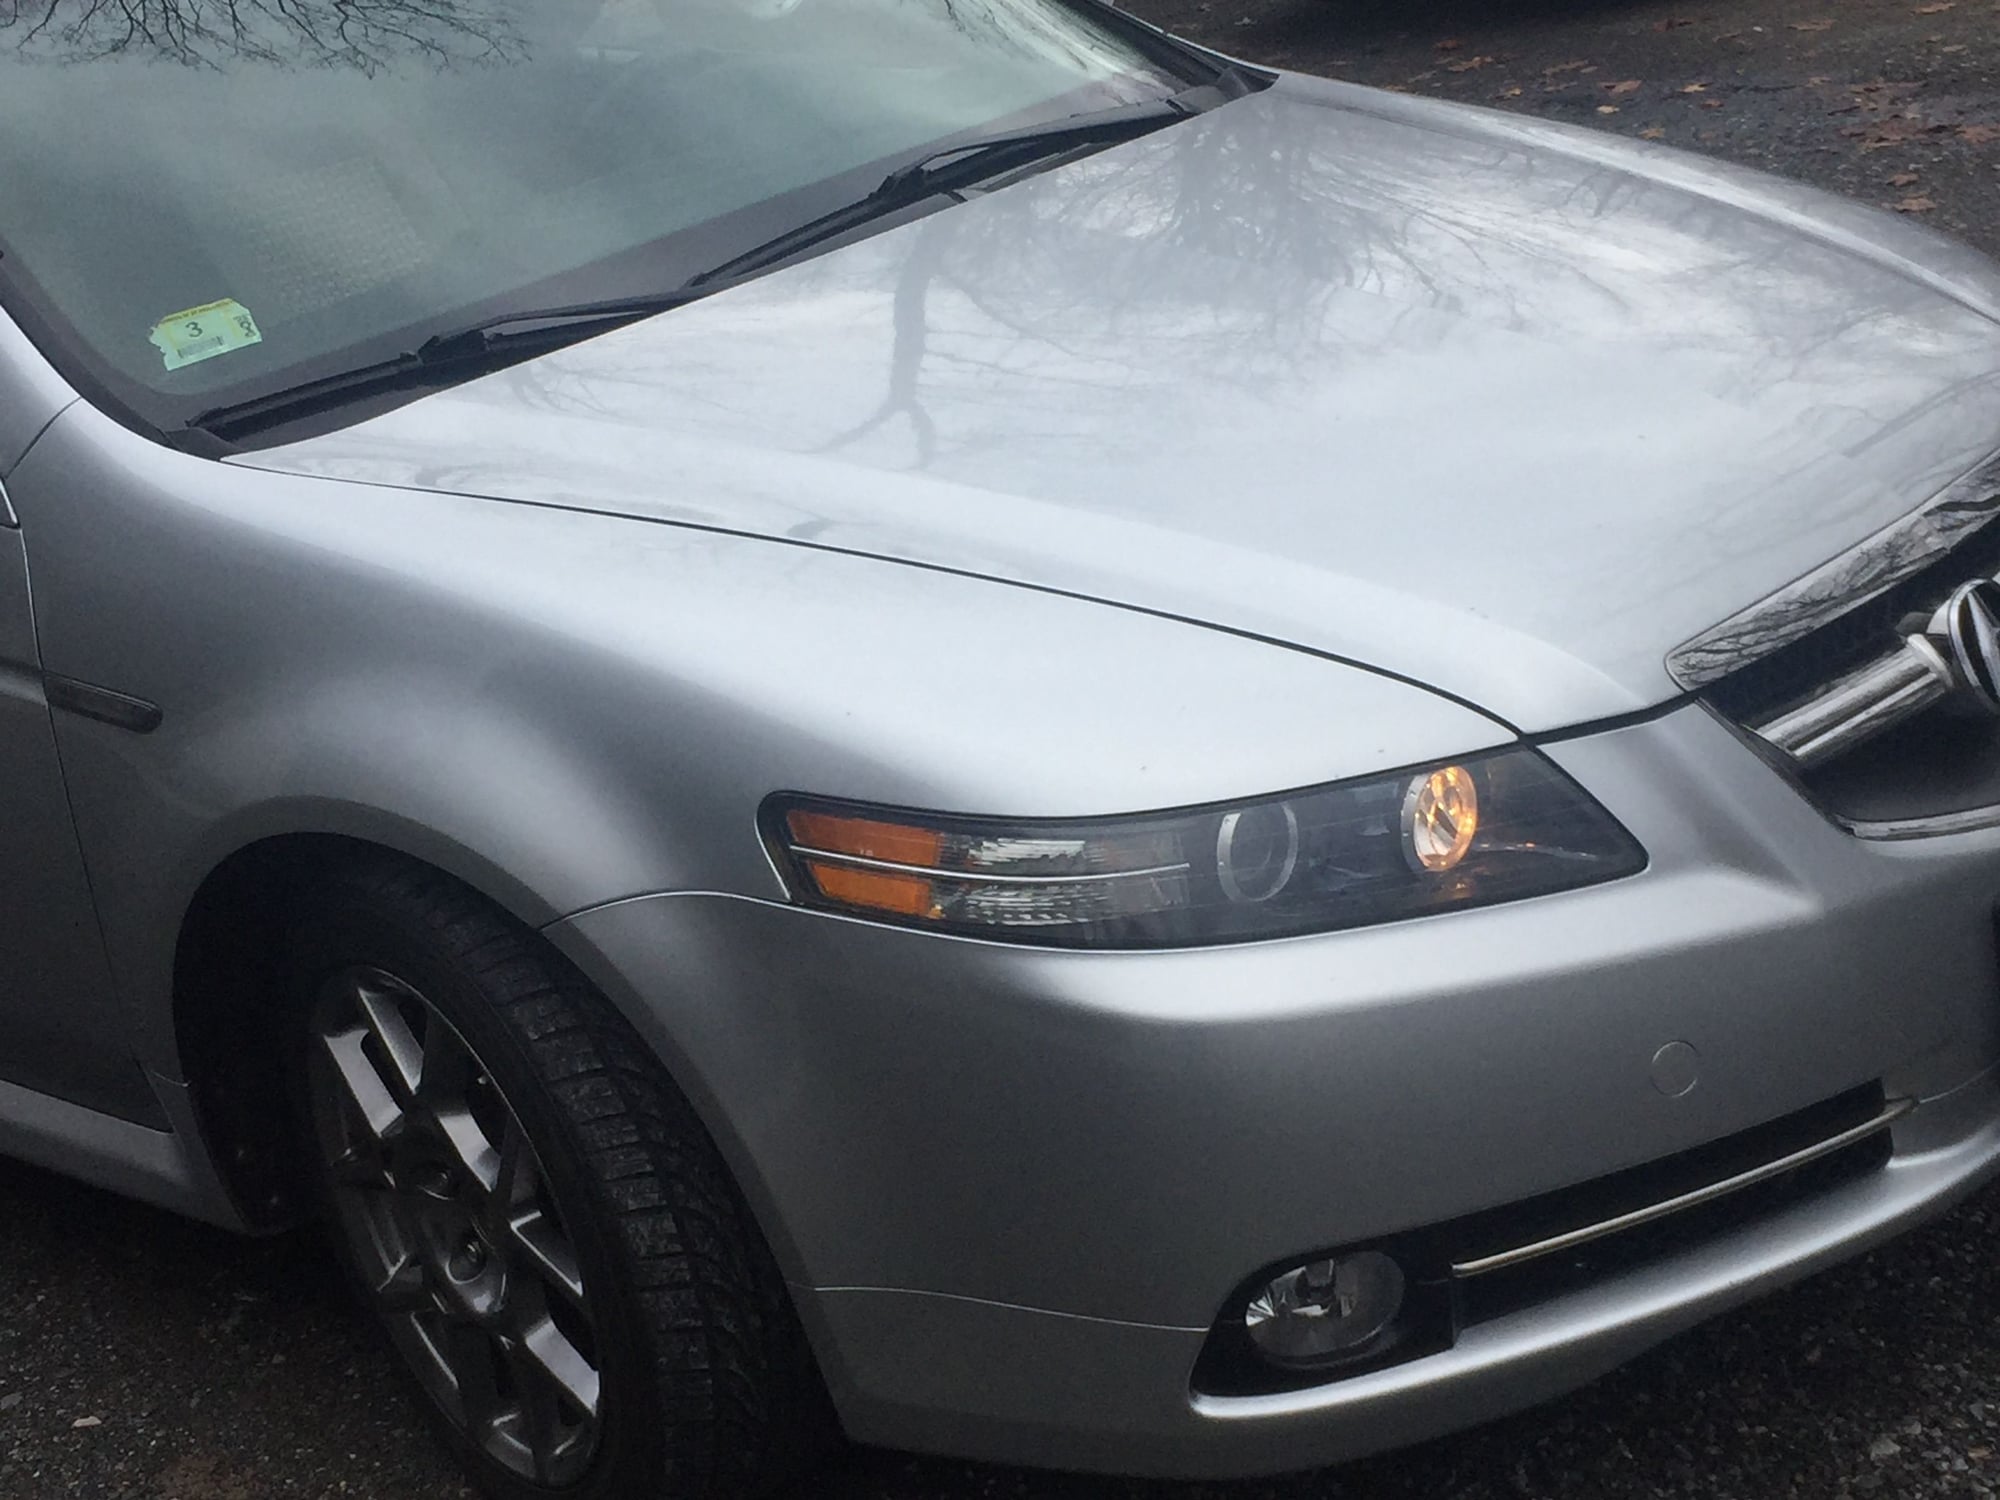 2008 Acura TL - SOLD: Acura TL 2008 type s  REBUILT TITLE - Used - VIN 19uua76518A032277 - 53,154 Miles - 6 cyl - 2WD - Automatic - Sedan - Silver - Morris, CT 06763, United States